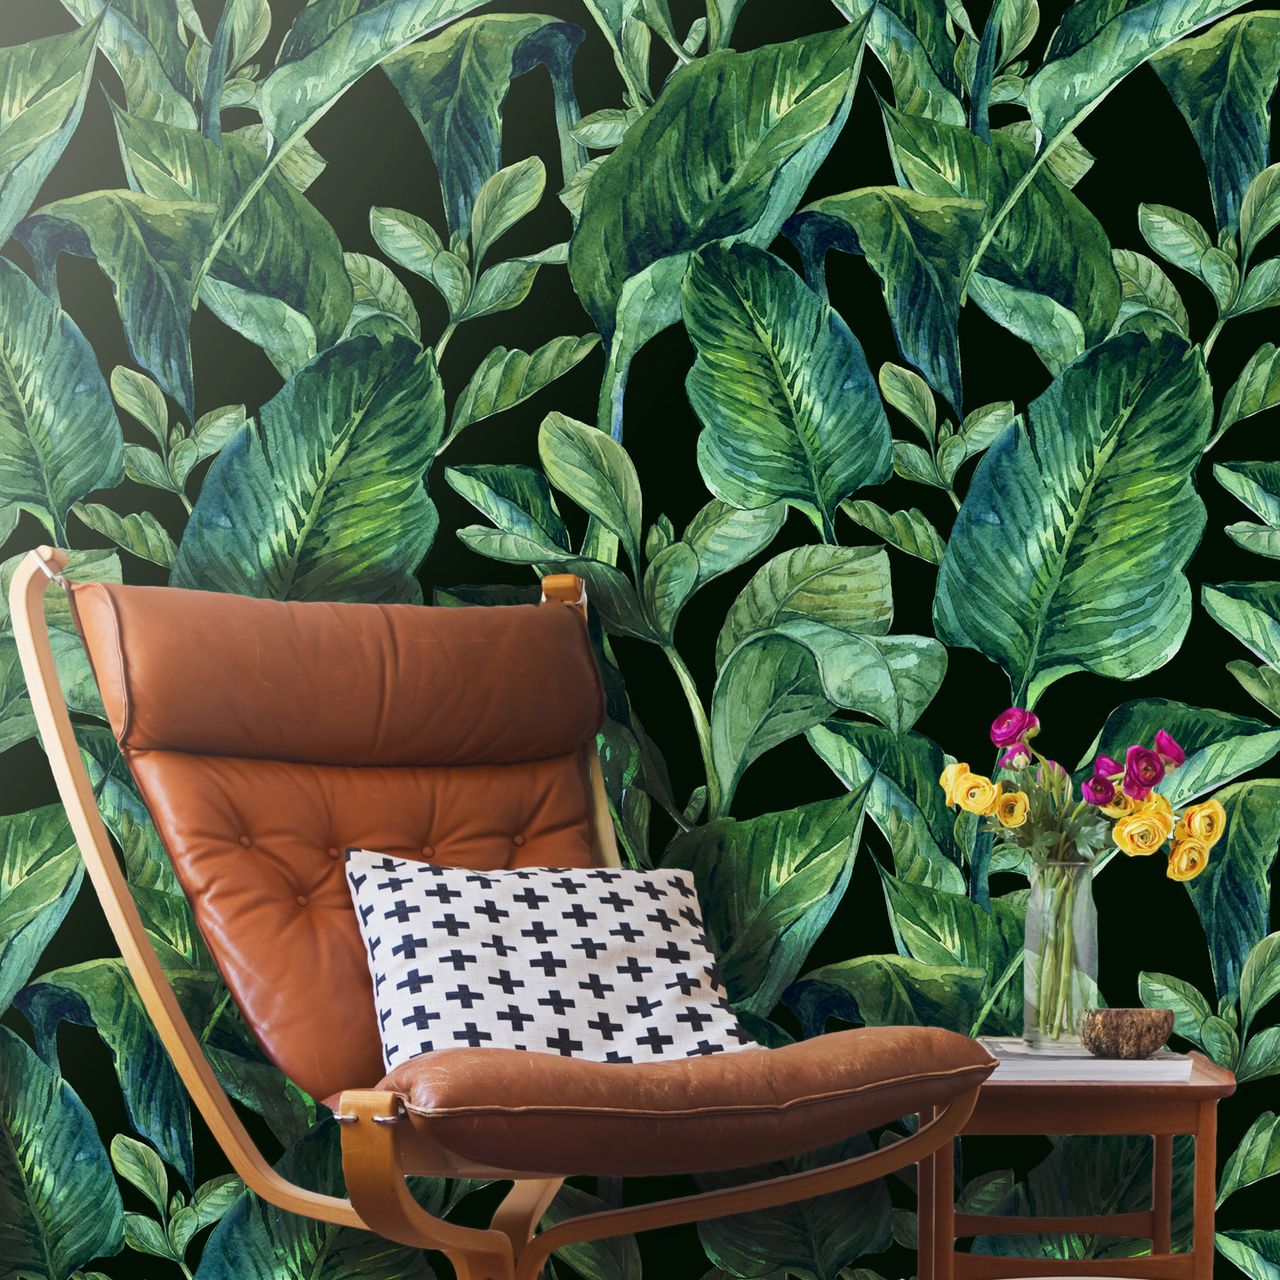 Tropical Leaves Removable Wallpaper Black Background Self